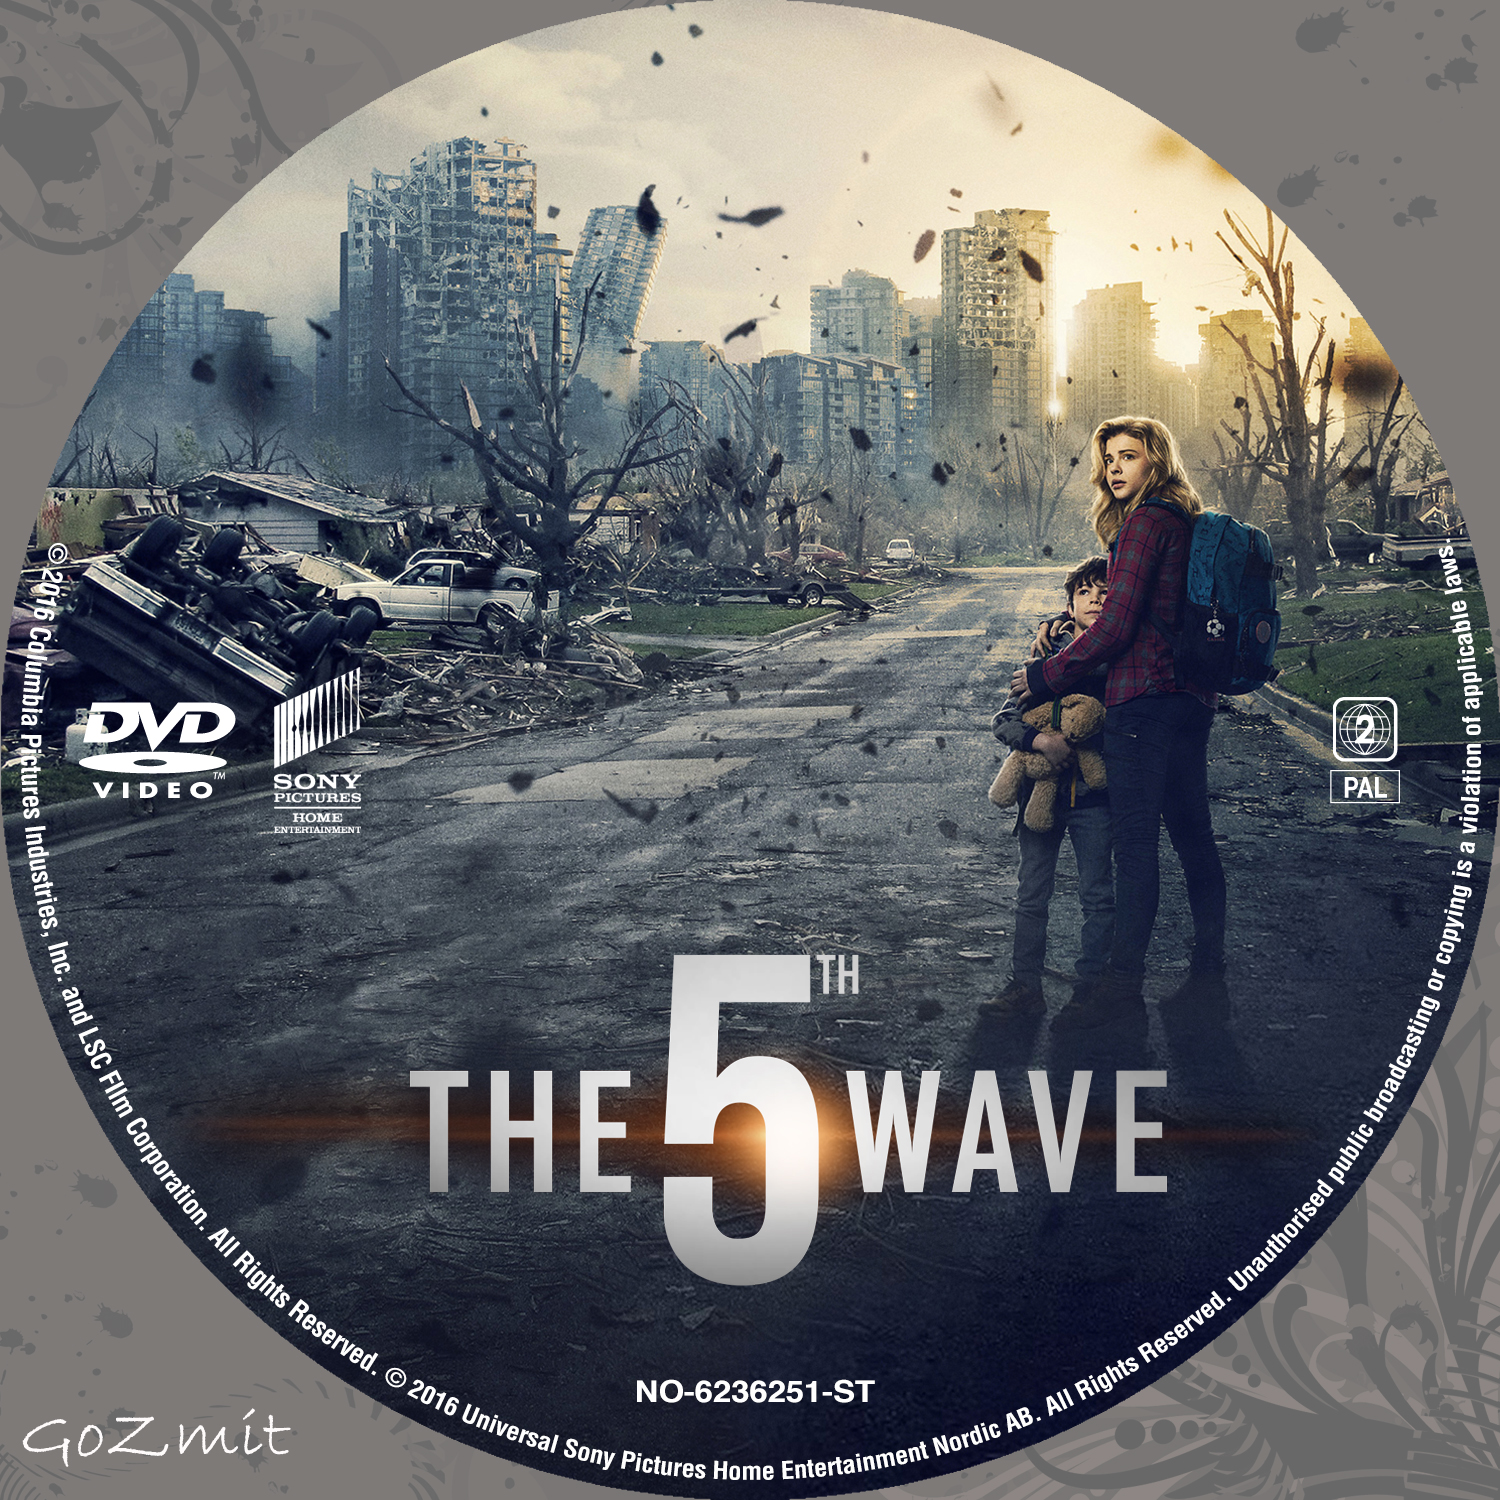 the 5th wave free movie